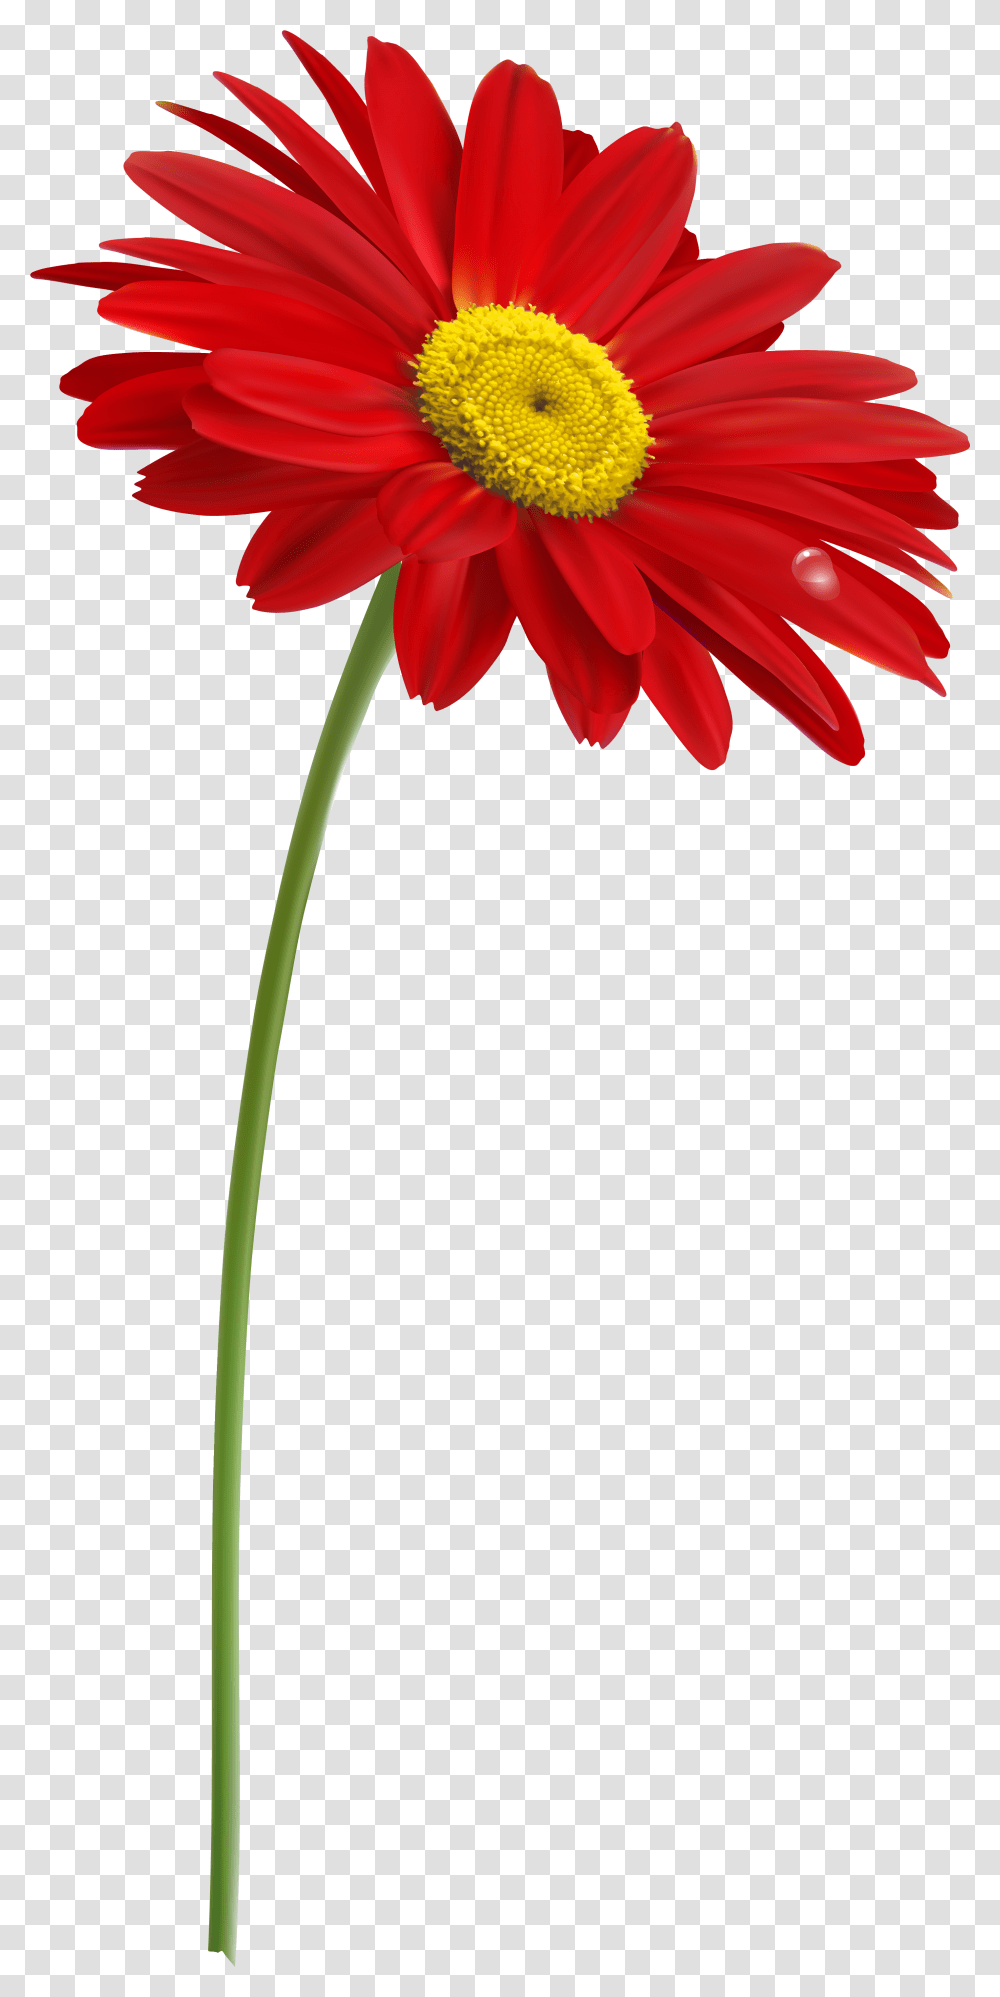 Red Gerber With Stem Clipart Image Flower Stem, Plant, Blossom, Daisy, Daisies Transparent Png